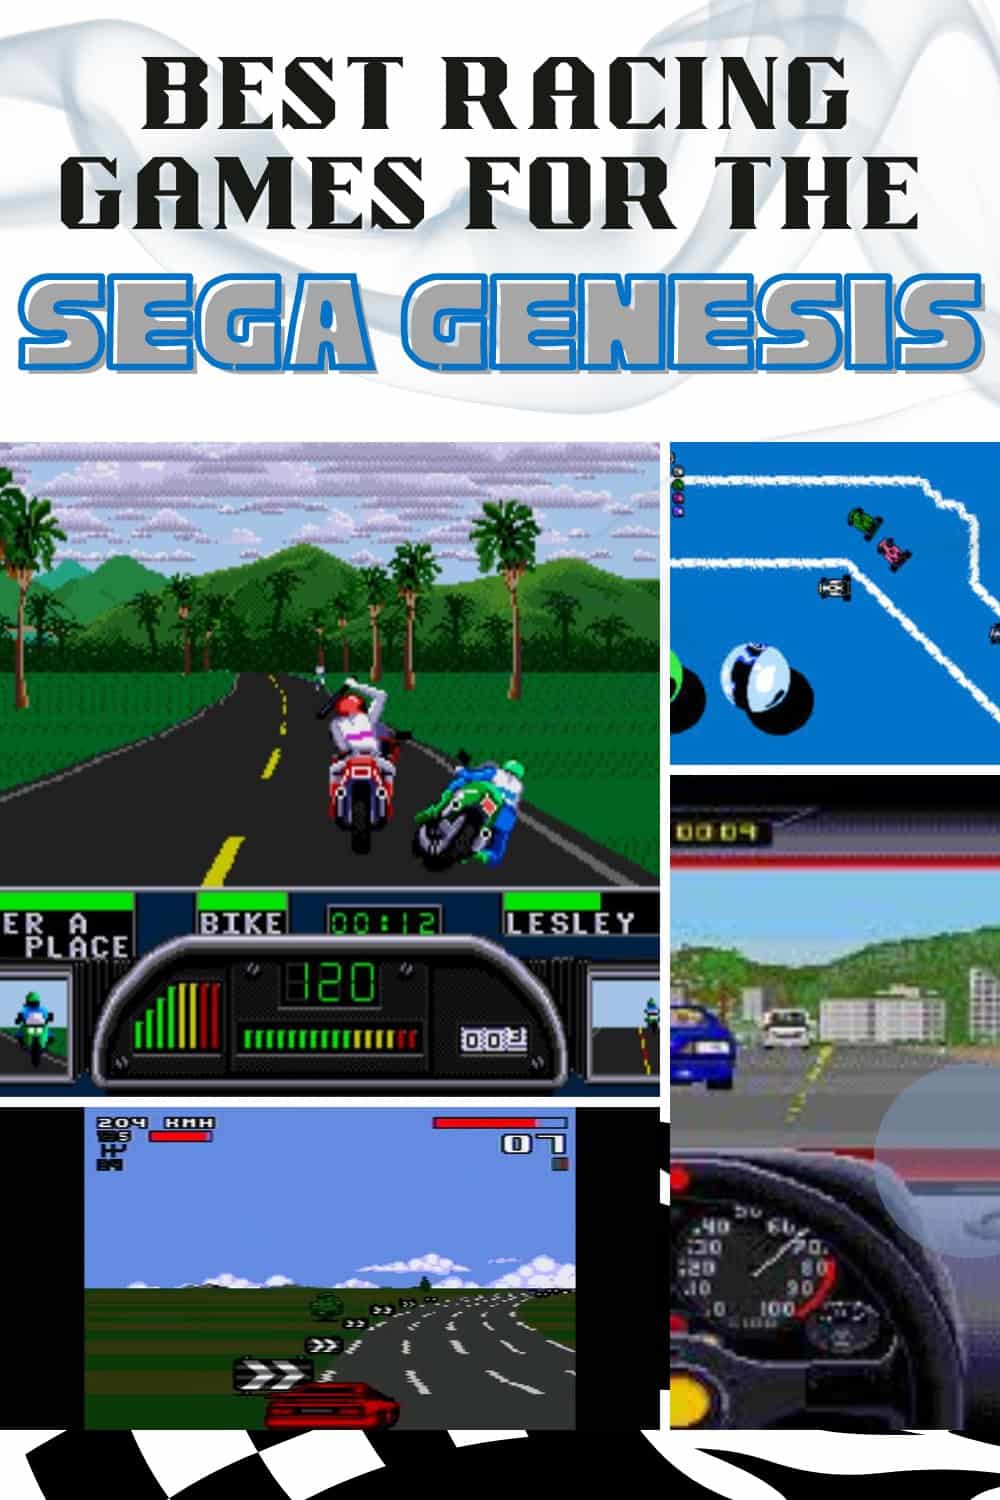 What is the best racing game for the Sega Genesis?